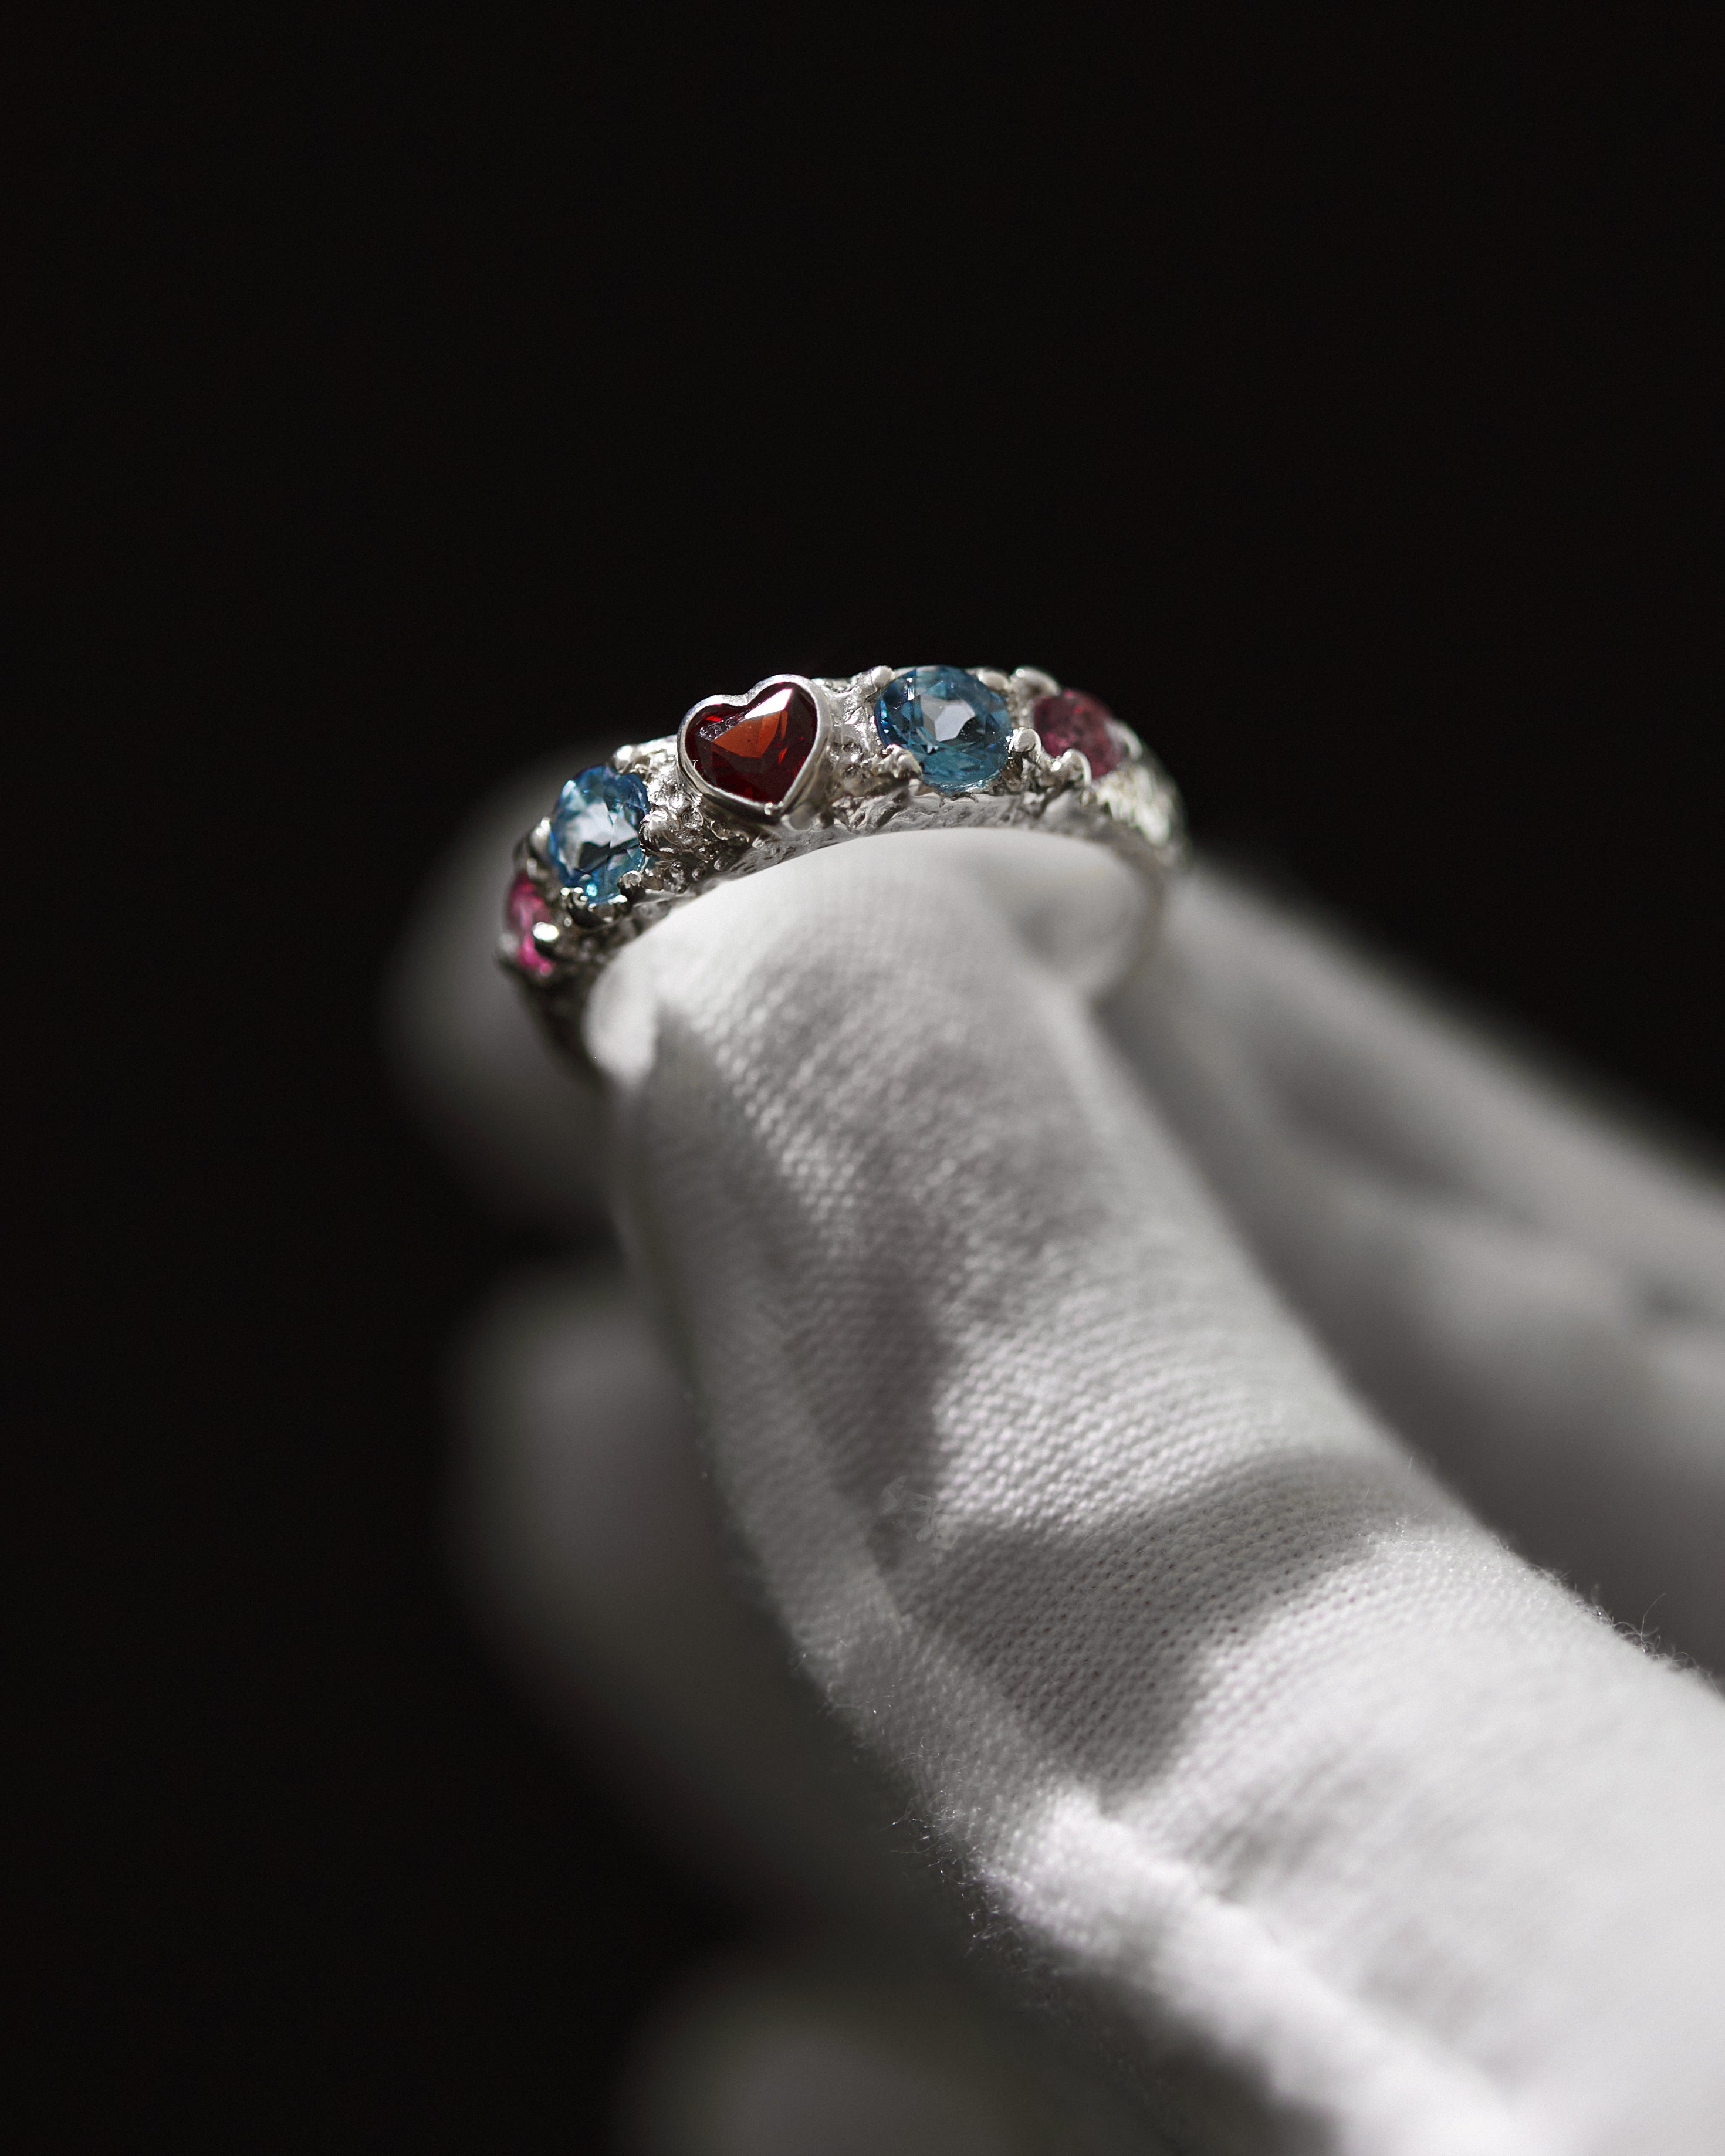 Coup de Foudre Ring in Silver with Garnet, Aquamarine and Tourmaline